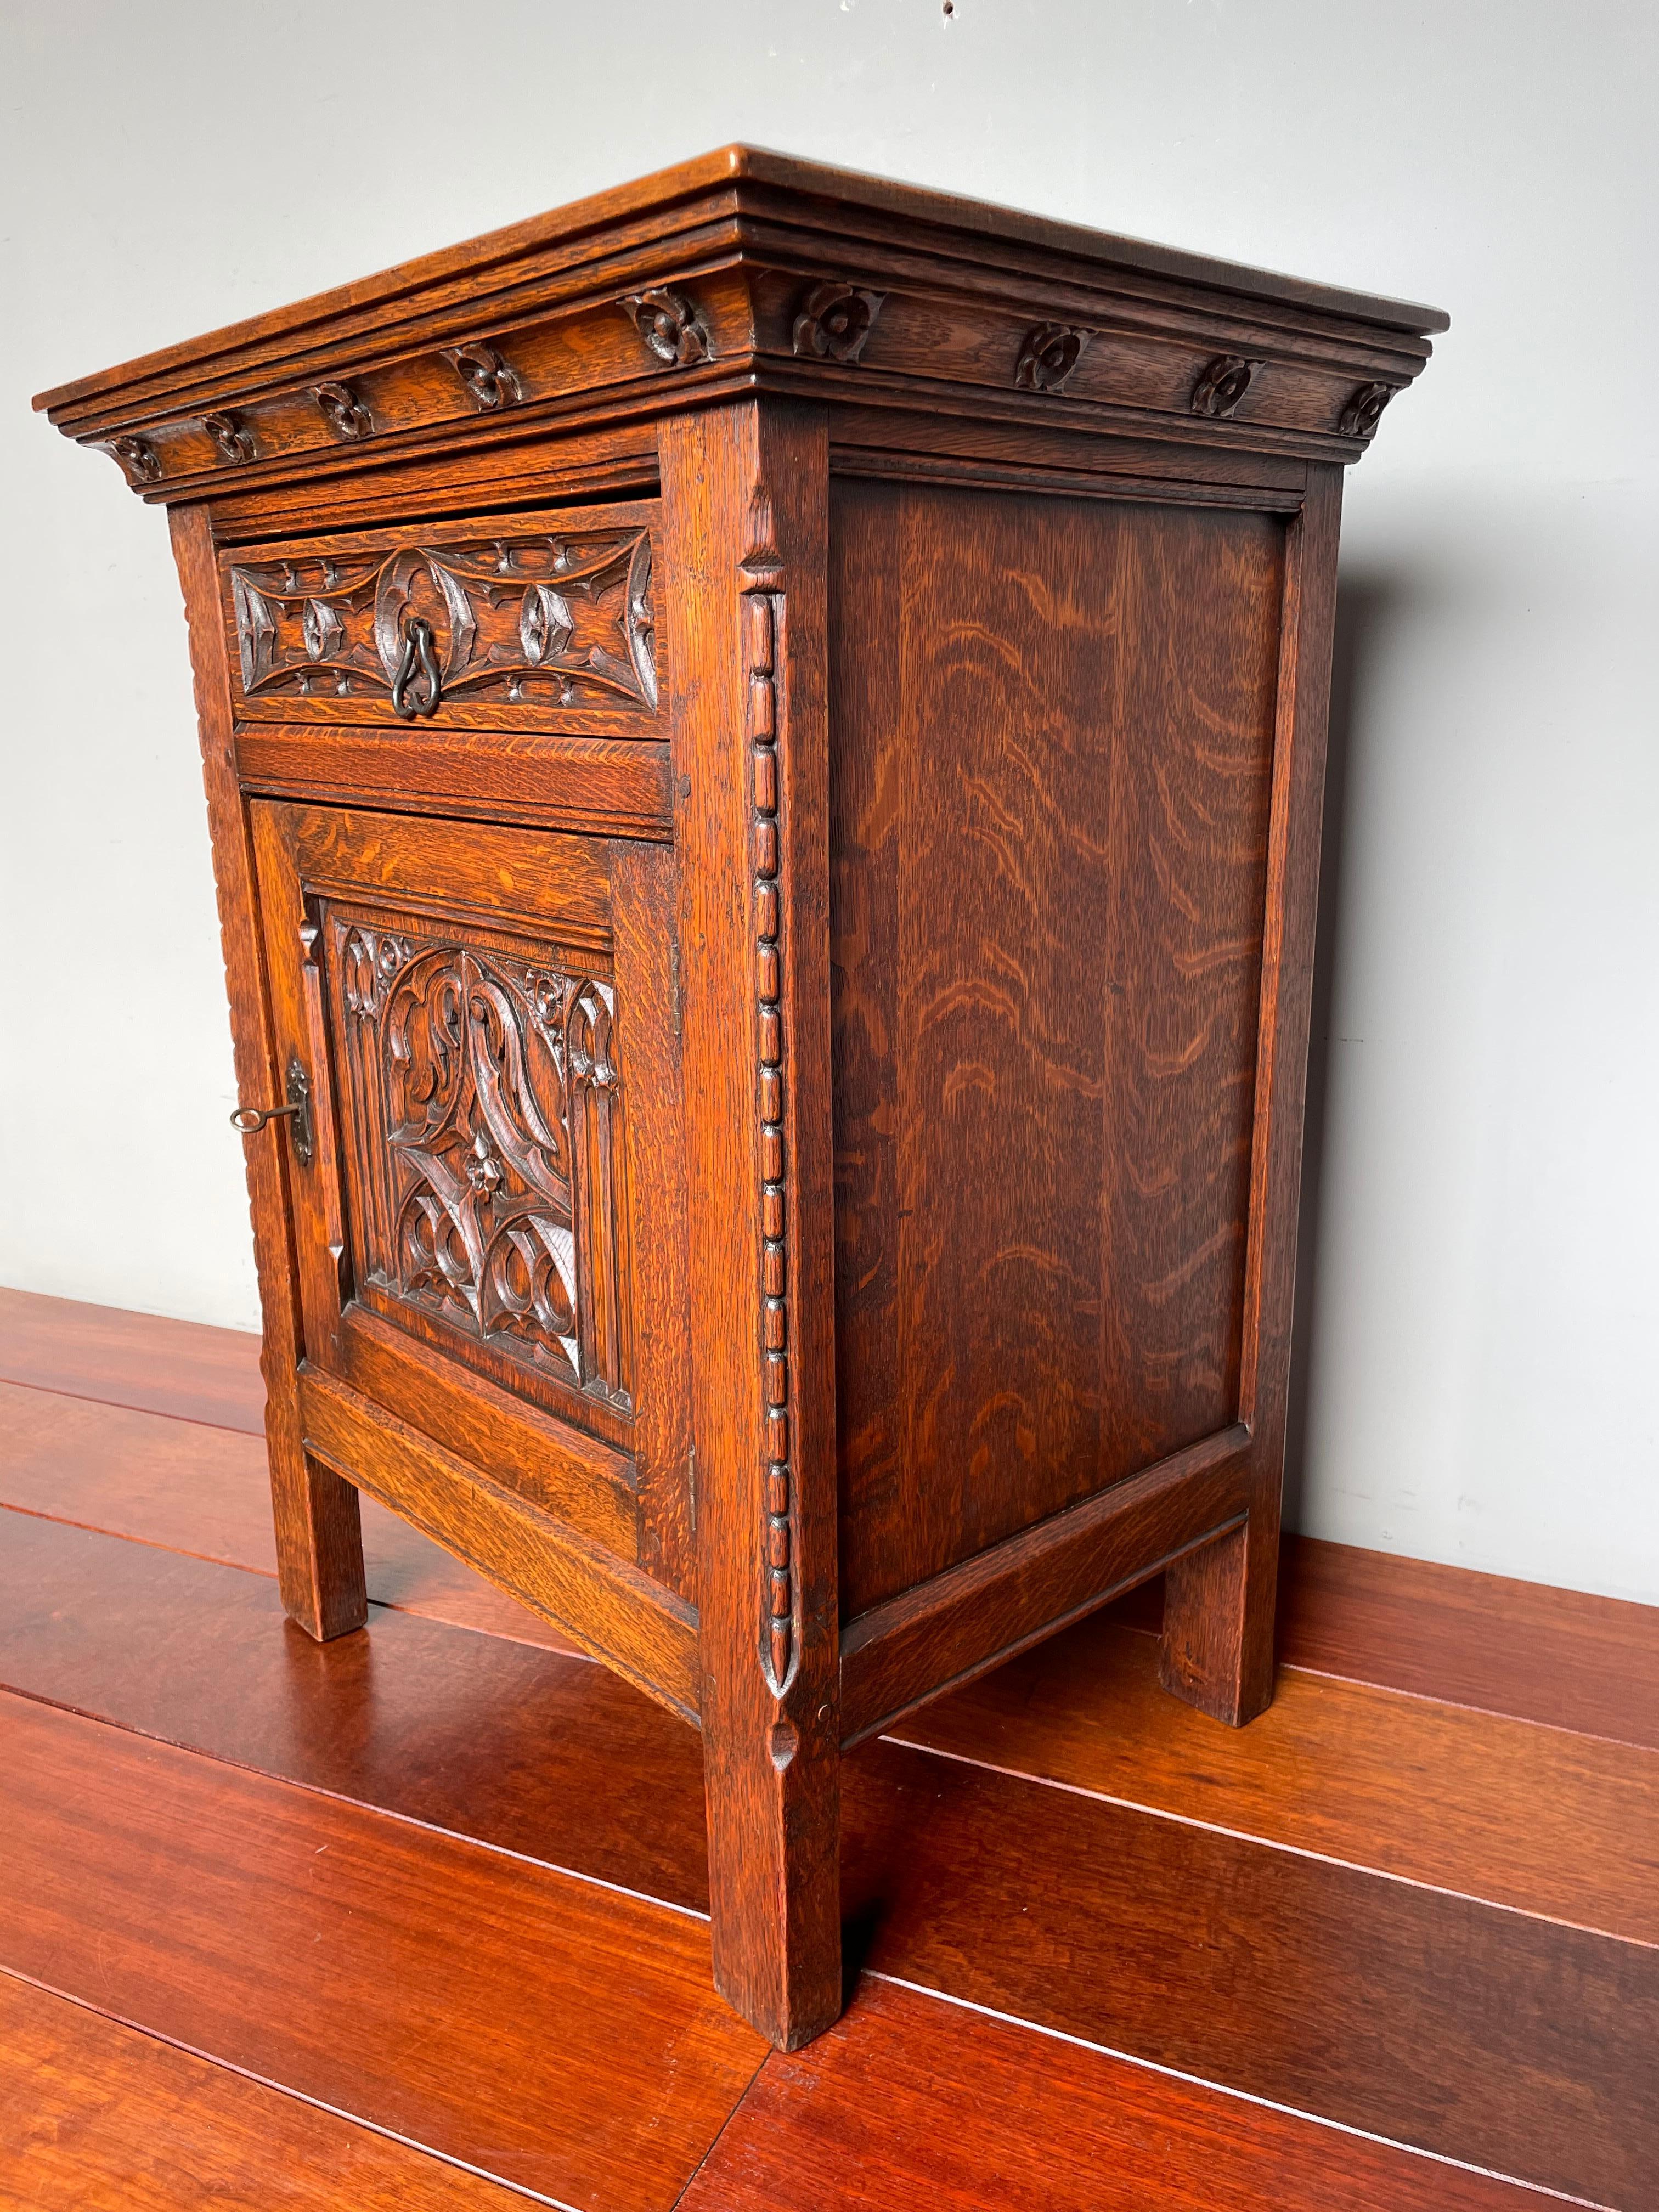 Mint condition, antique Gothic cabinet.

This practical size and beautifully hand carved tiger oak cabinet from circa 1920 is in mint condition. It comes with the finest quality carved Gothic details and you could not wish for a more attractive